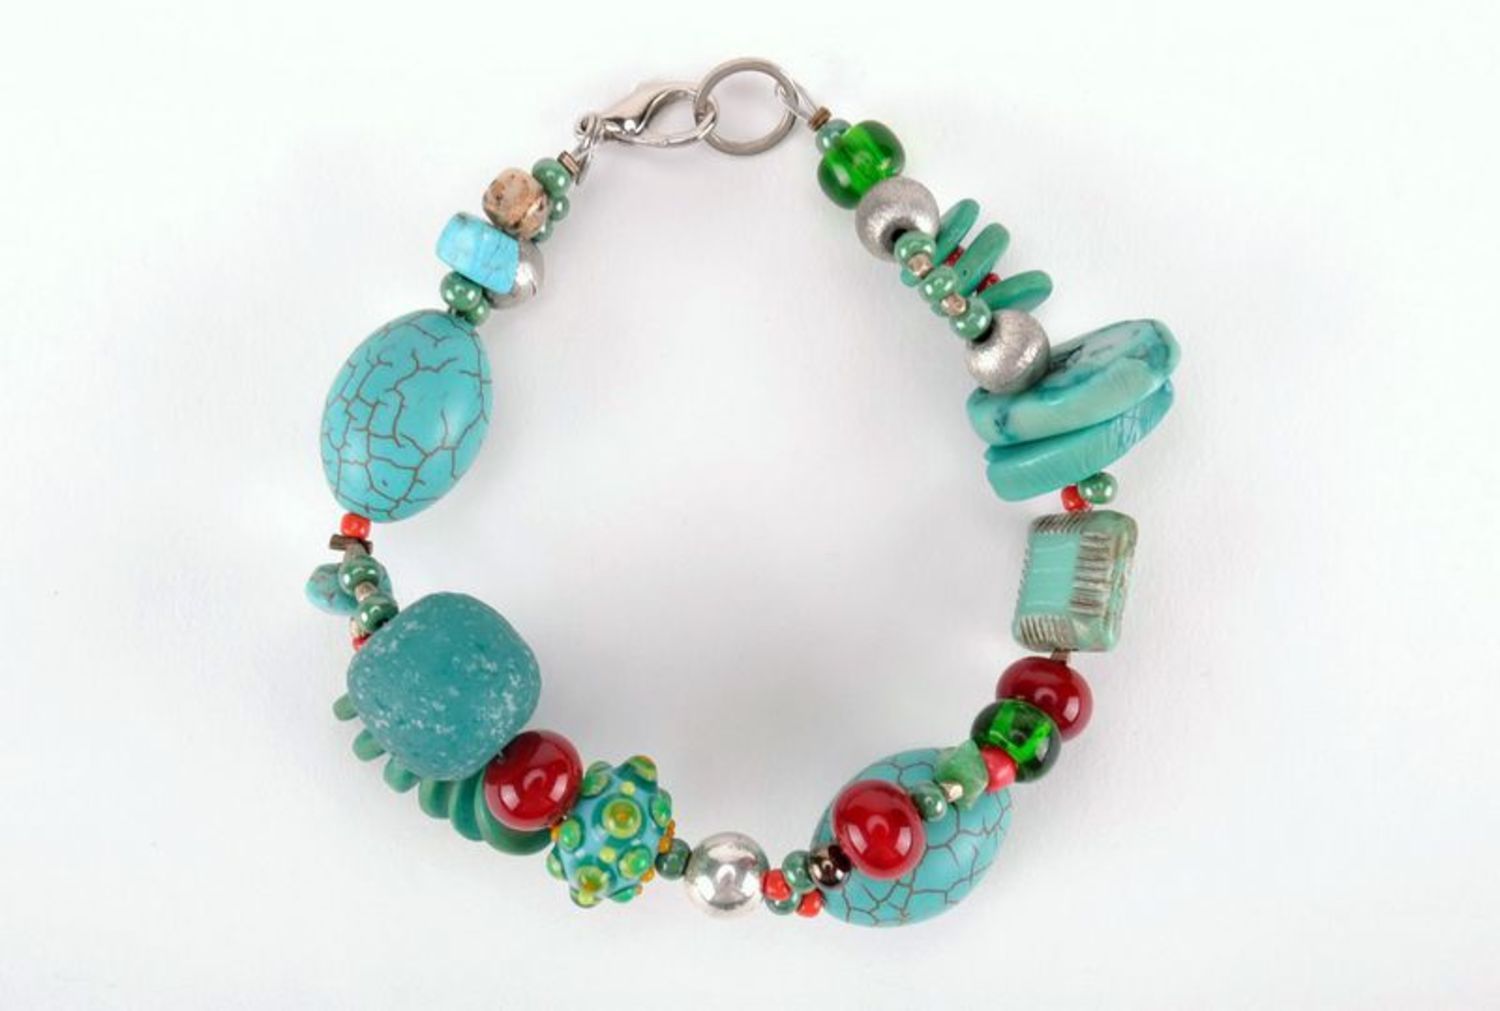 Wrist bracelet made from stones and beads photo 3